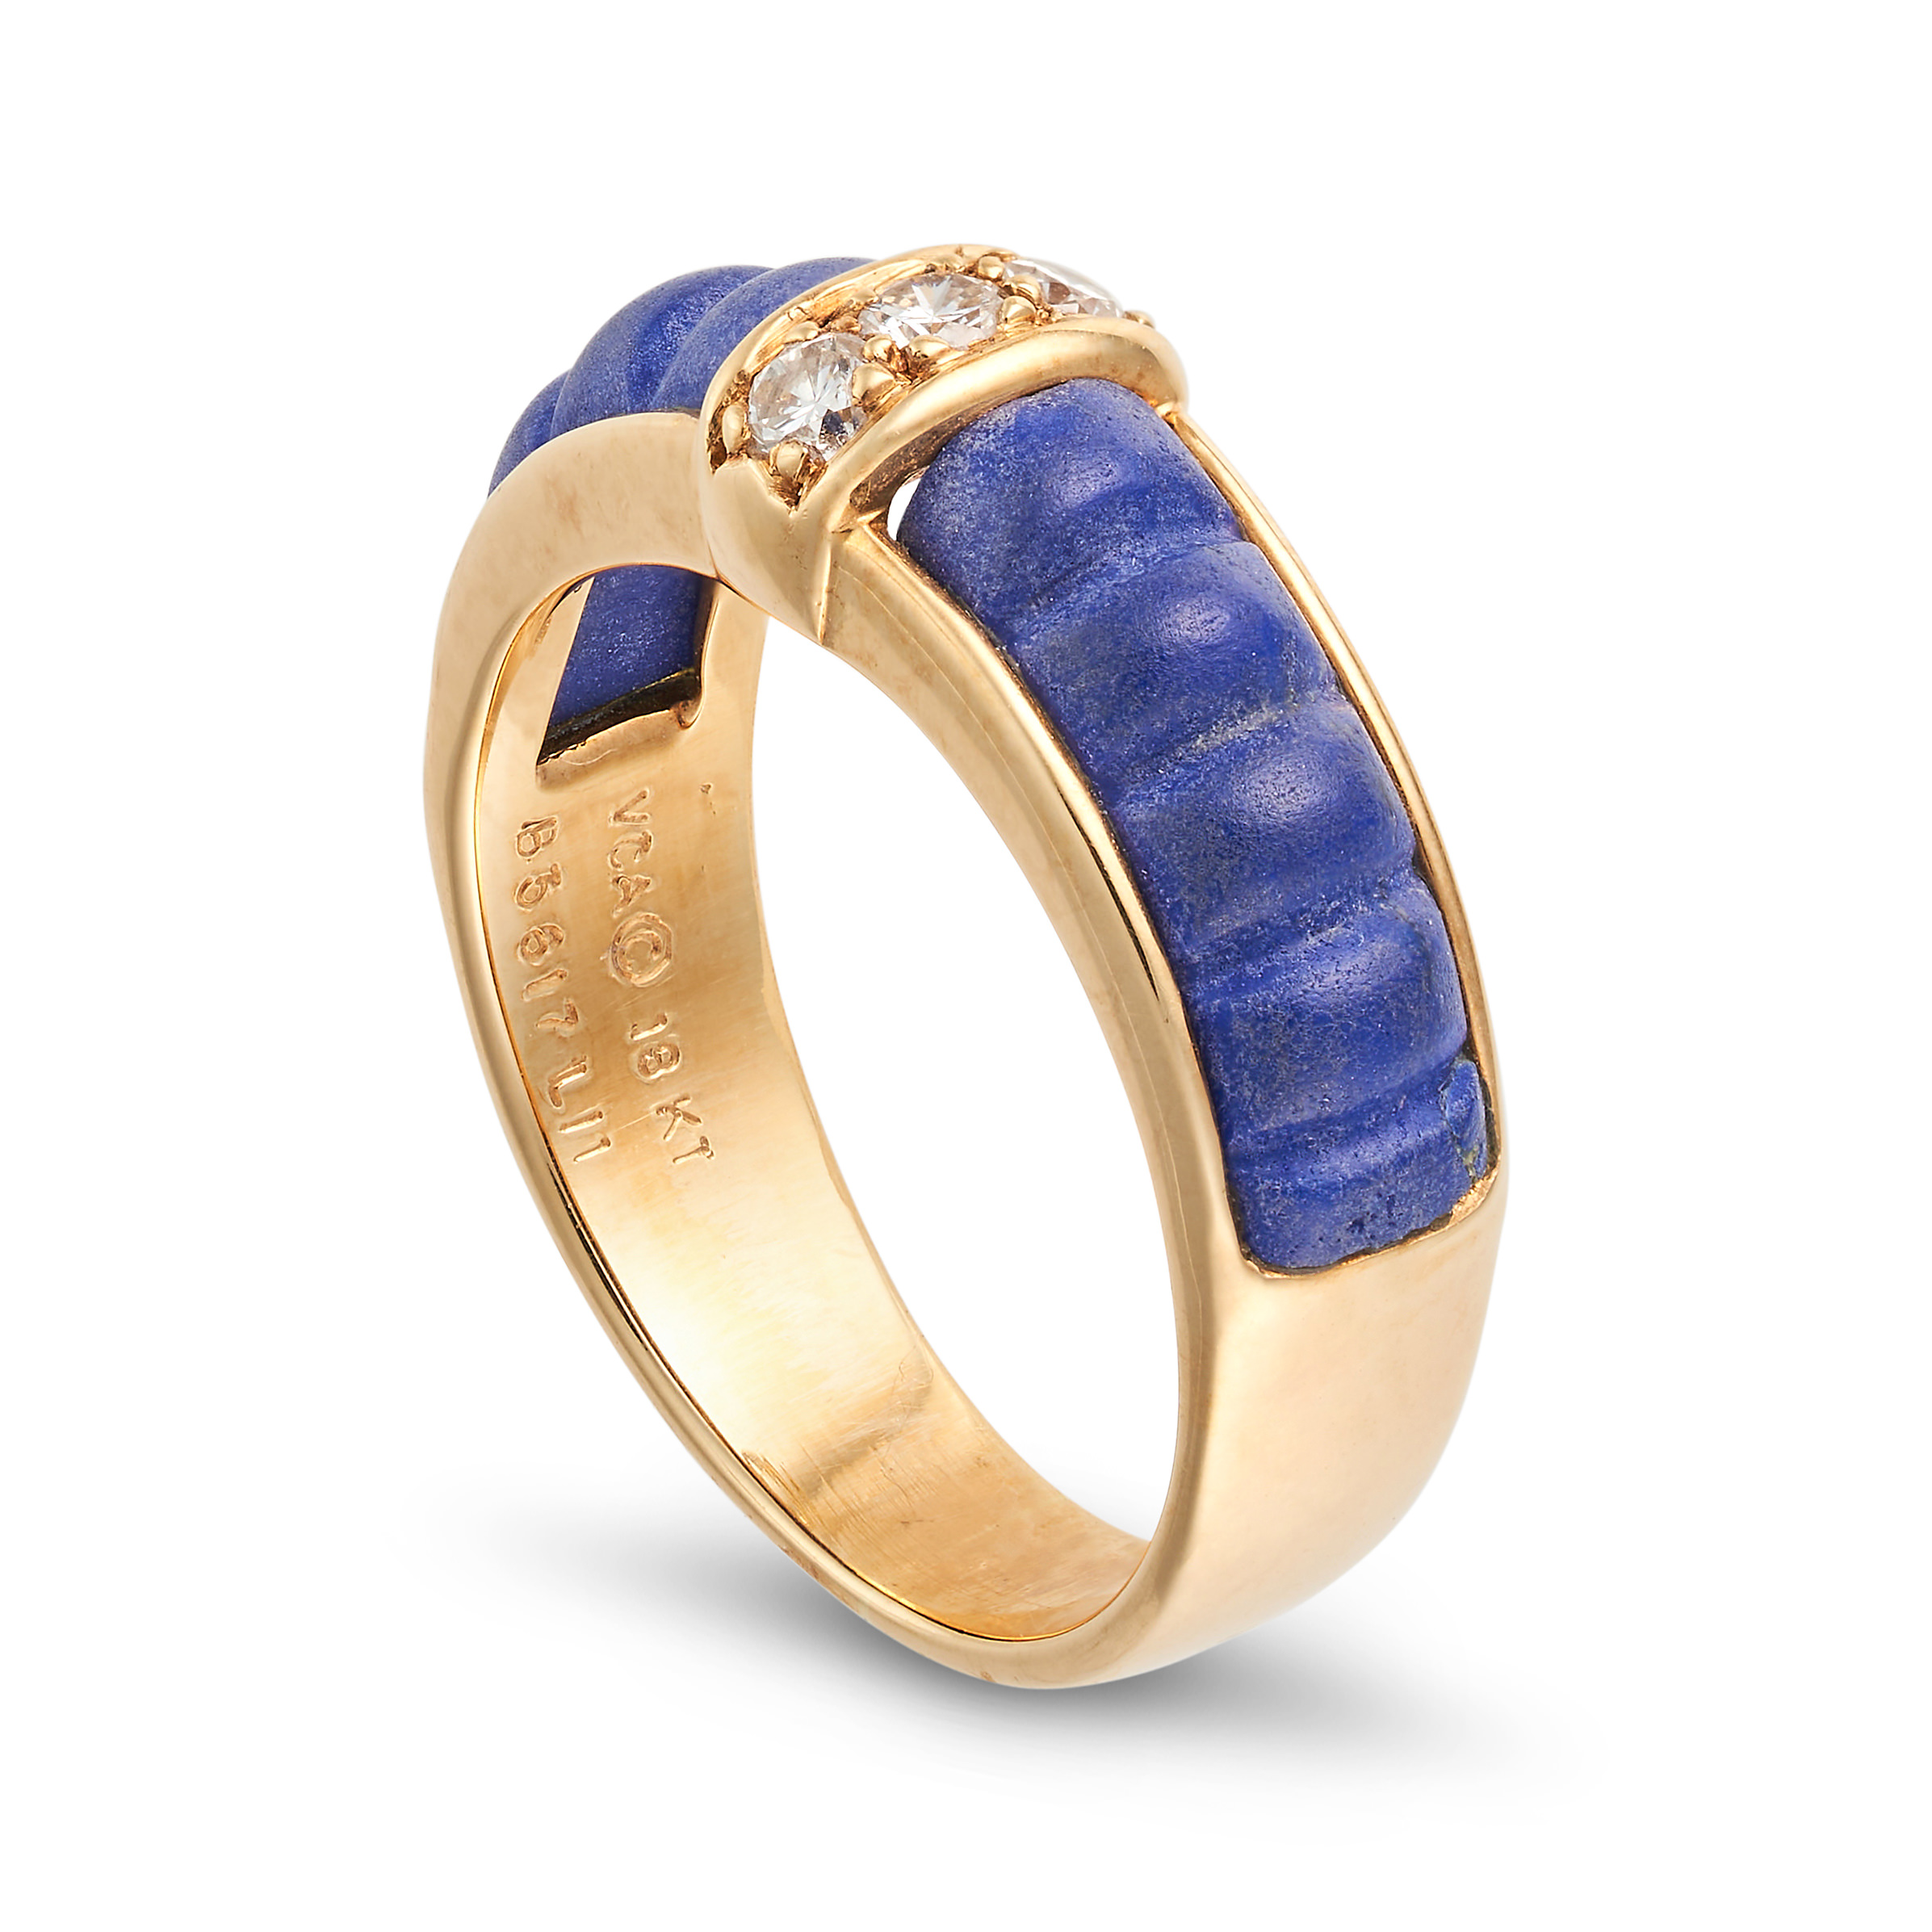 VAN CLEEF & ARPELS, A LAPIS LAZULI AND DIAMOND RING set with two sections of fluted lapis lazuli,... - Image 2 of 2